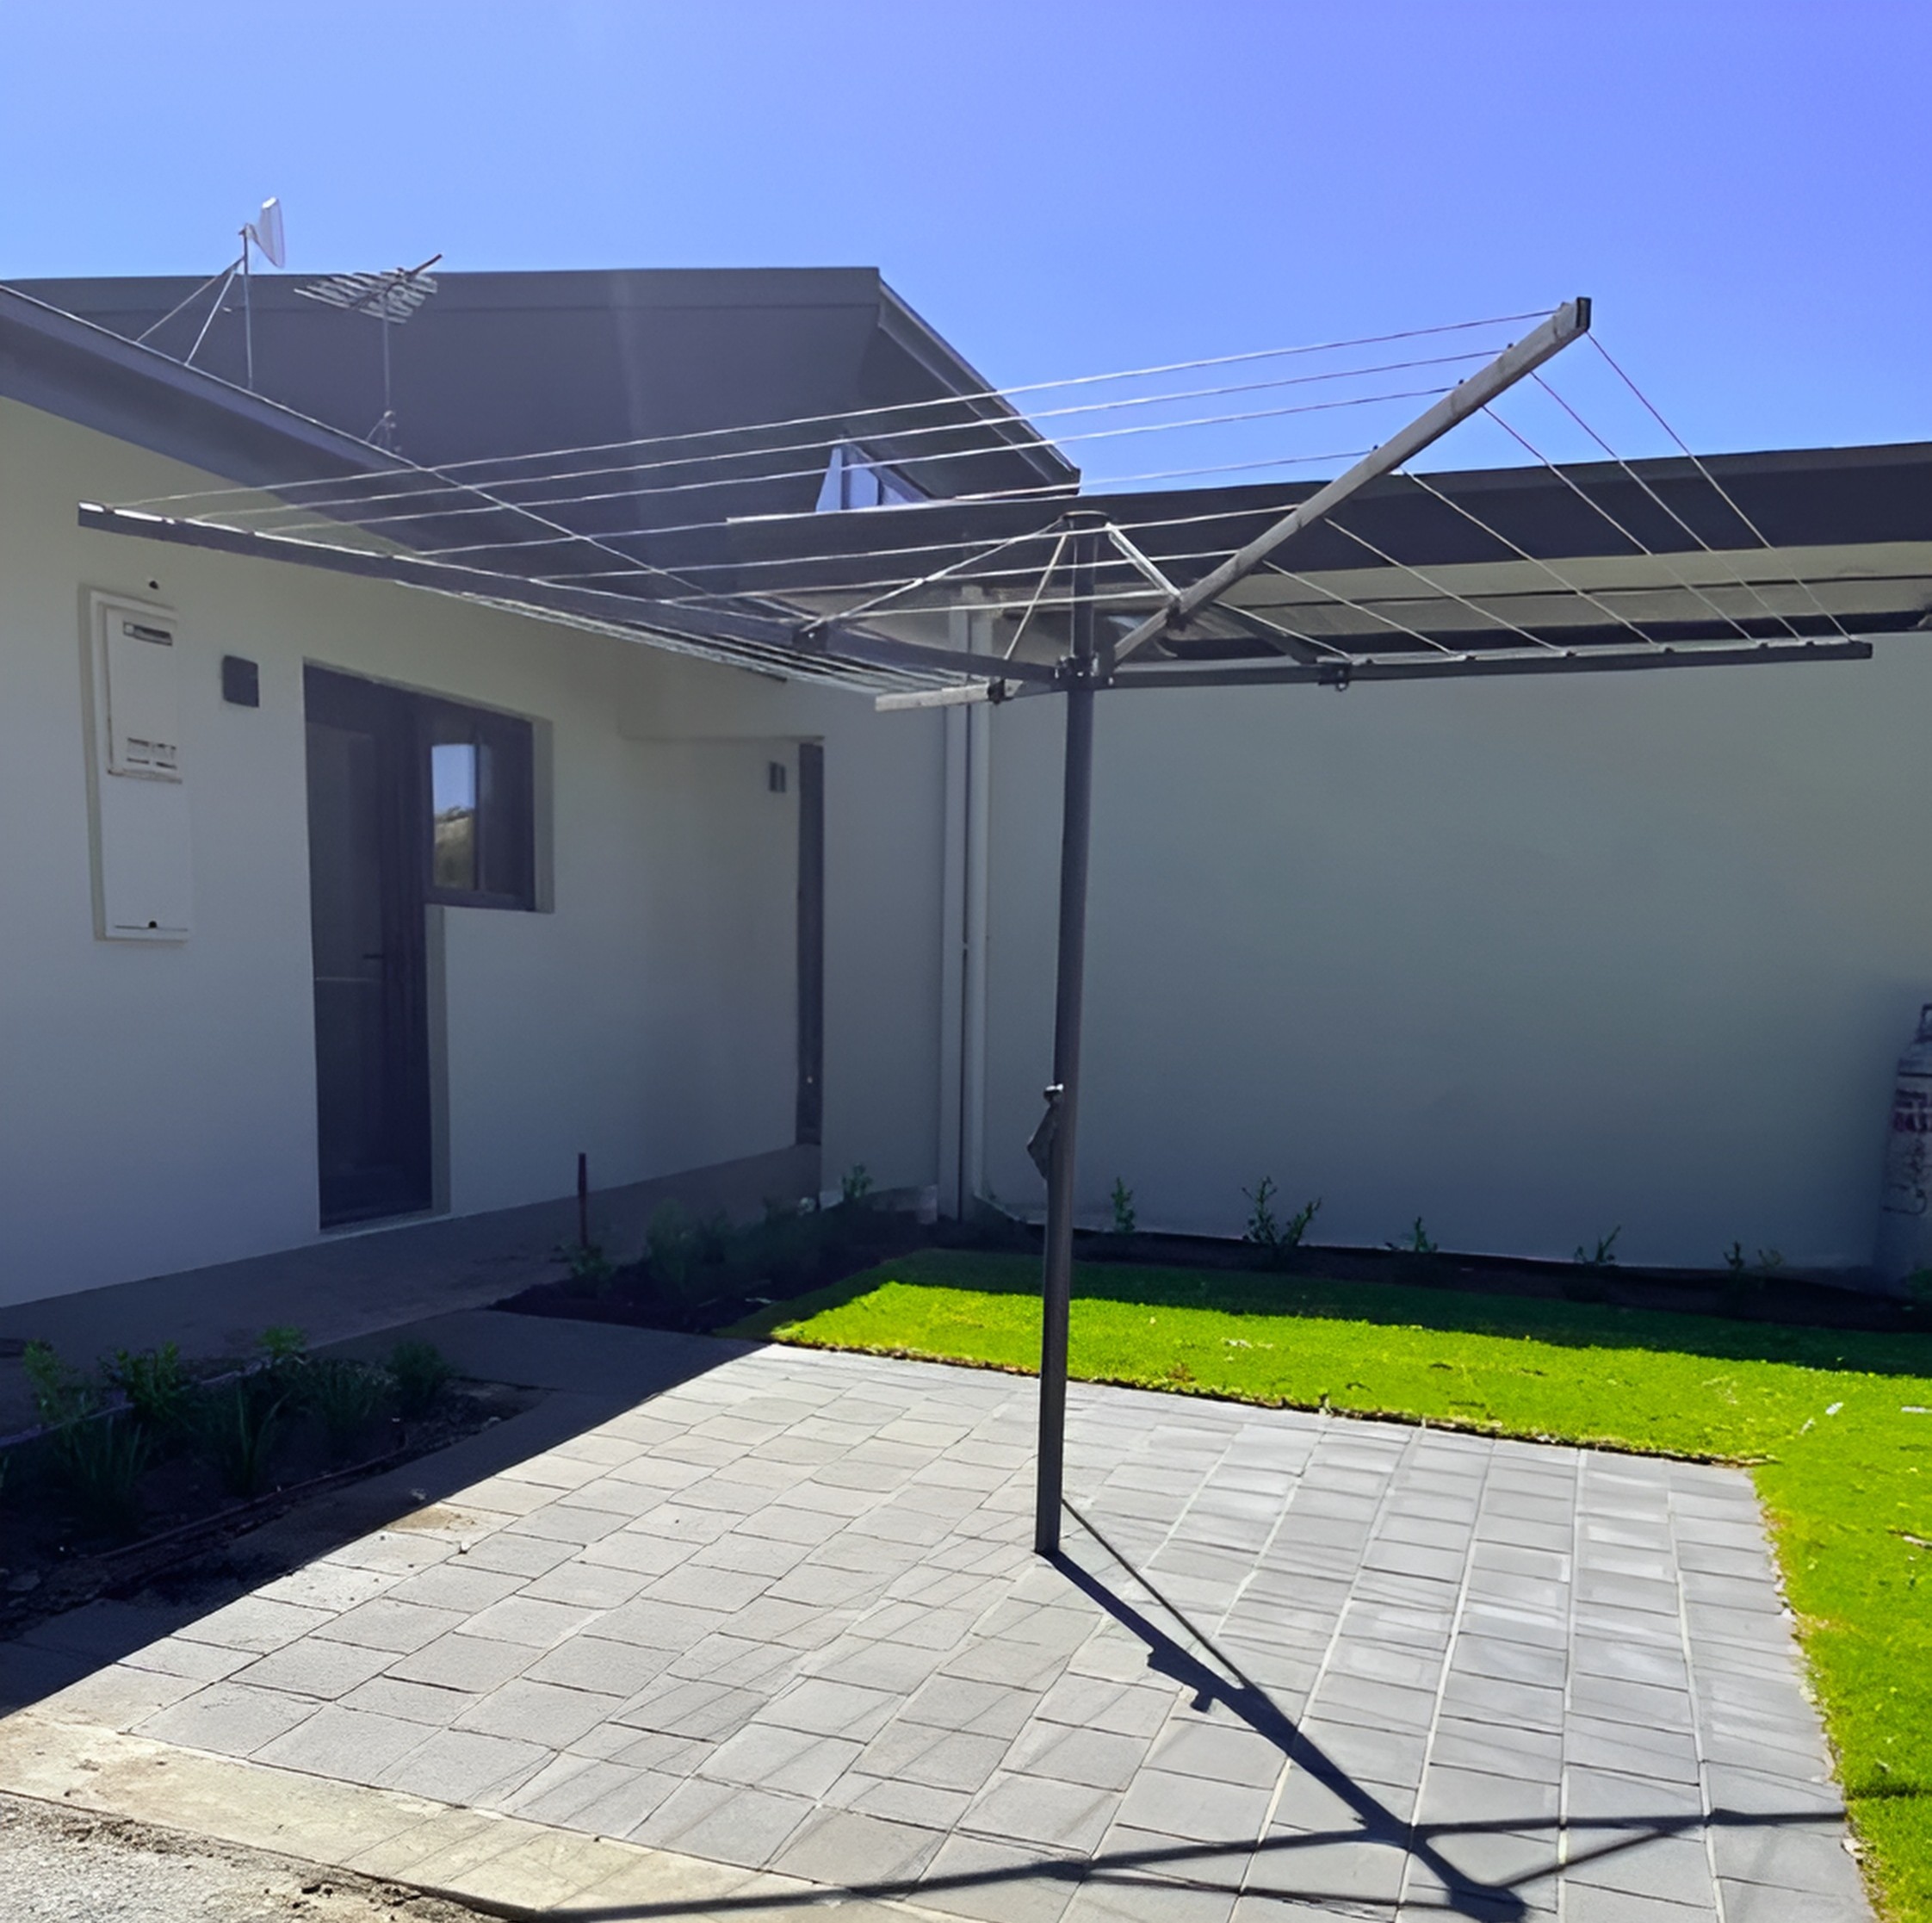 Rotary Clothesline for a Family of 5 10. Optimal Line Length for the Aussie Lifestyle